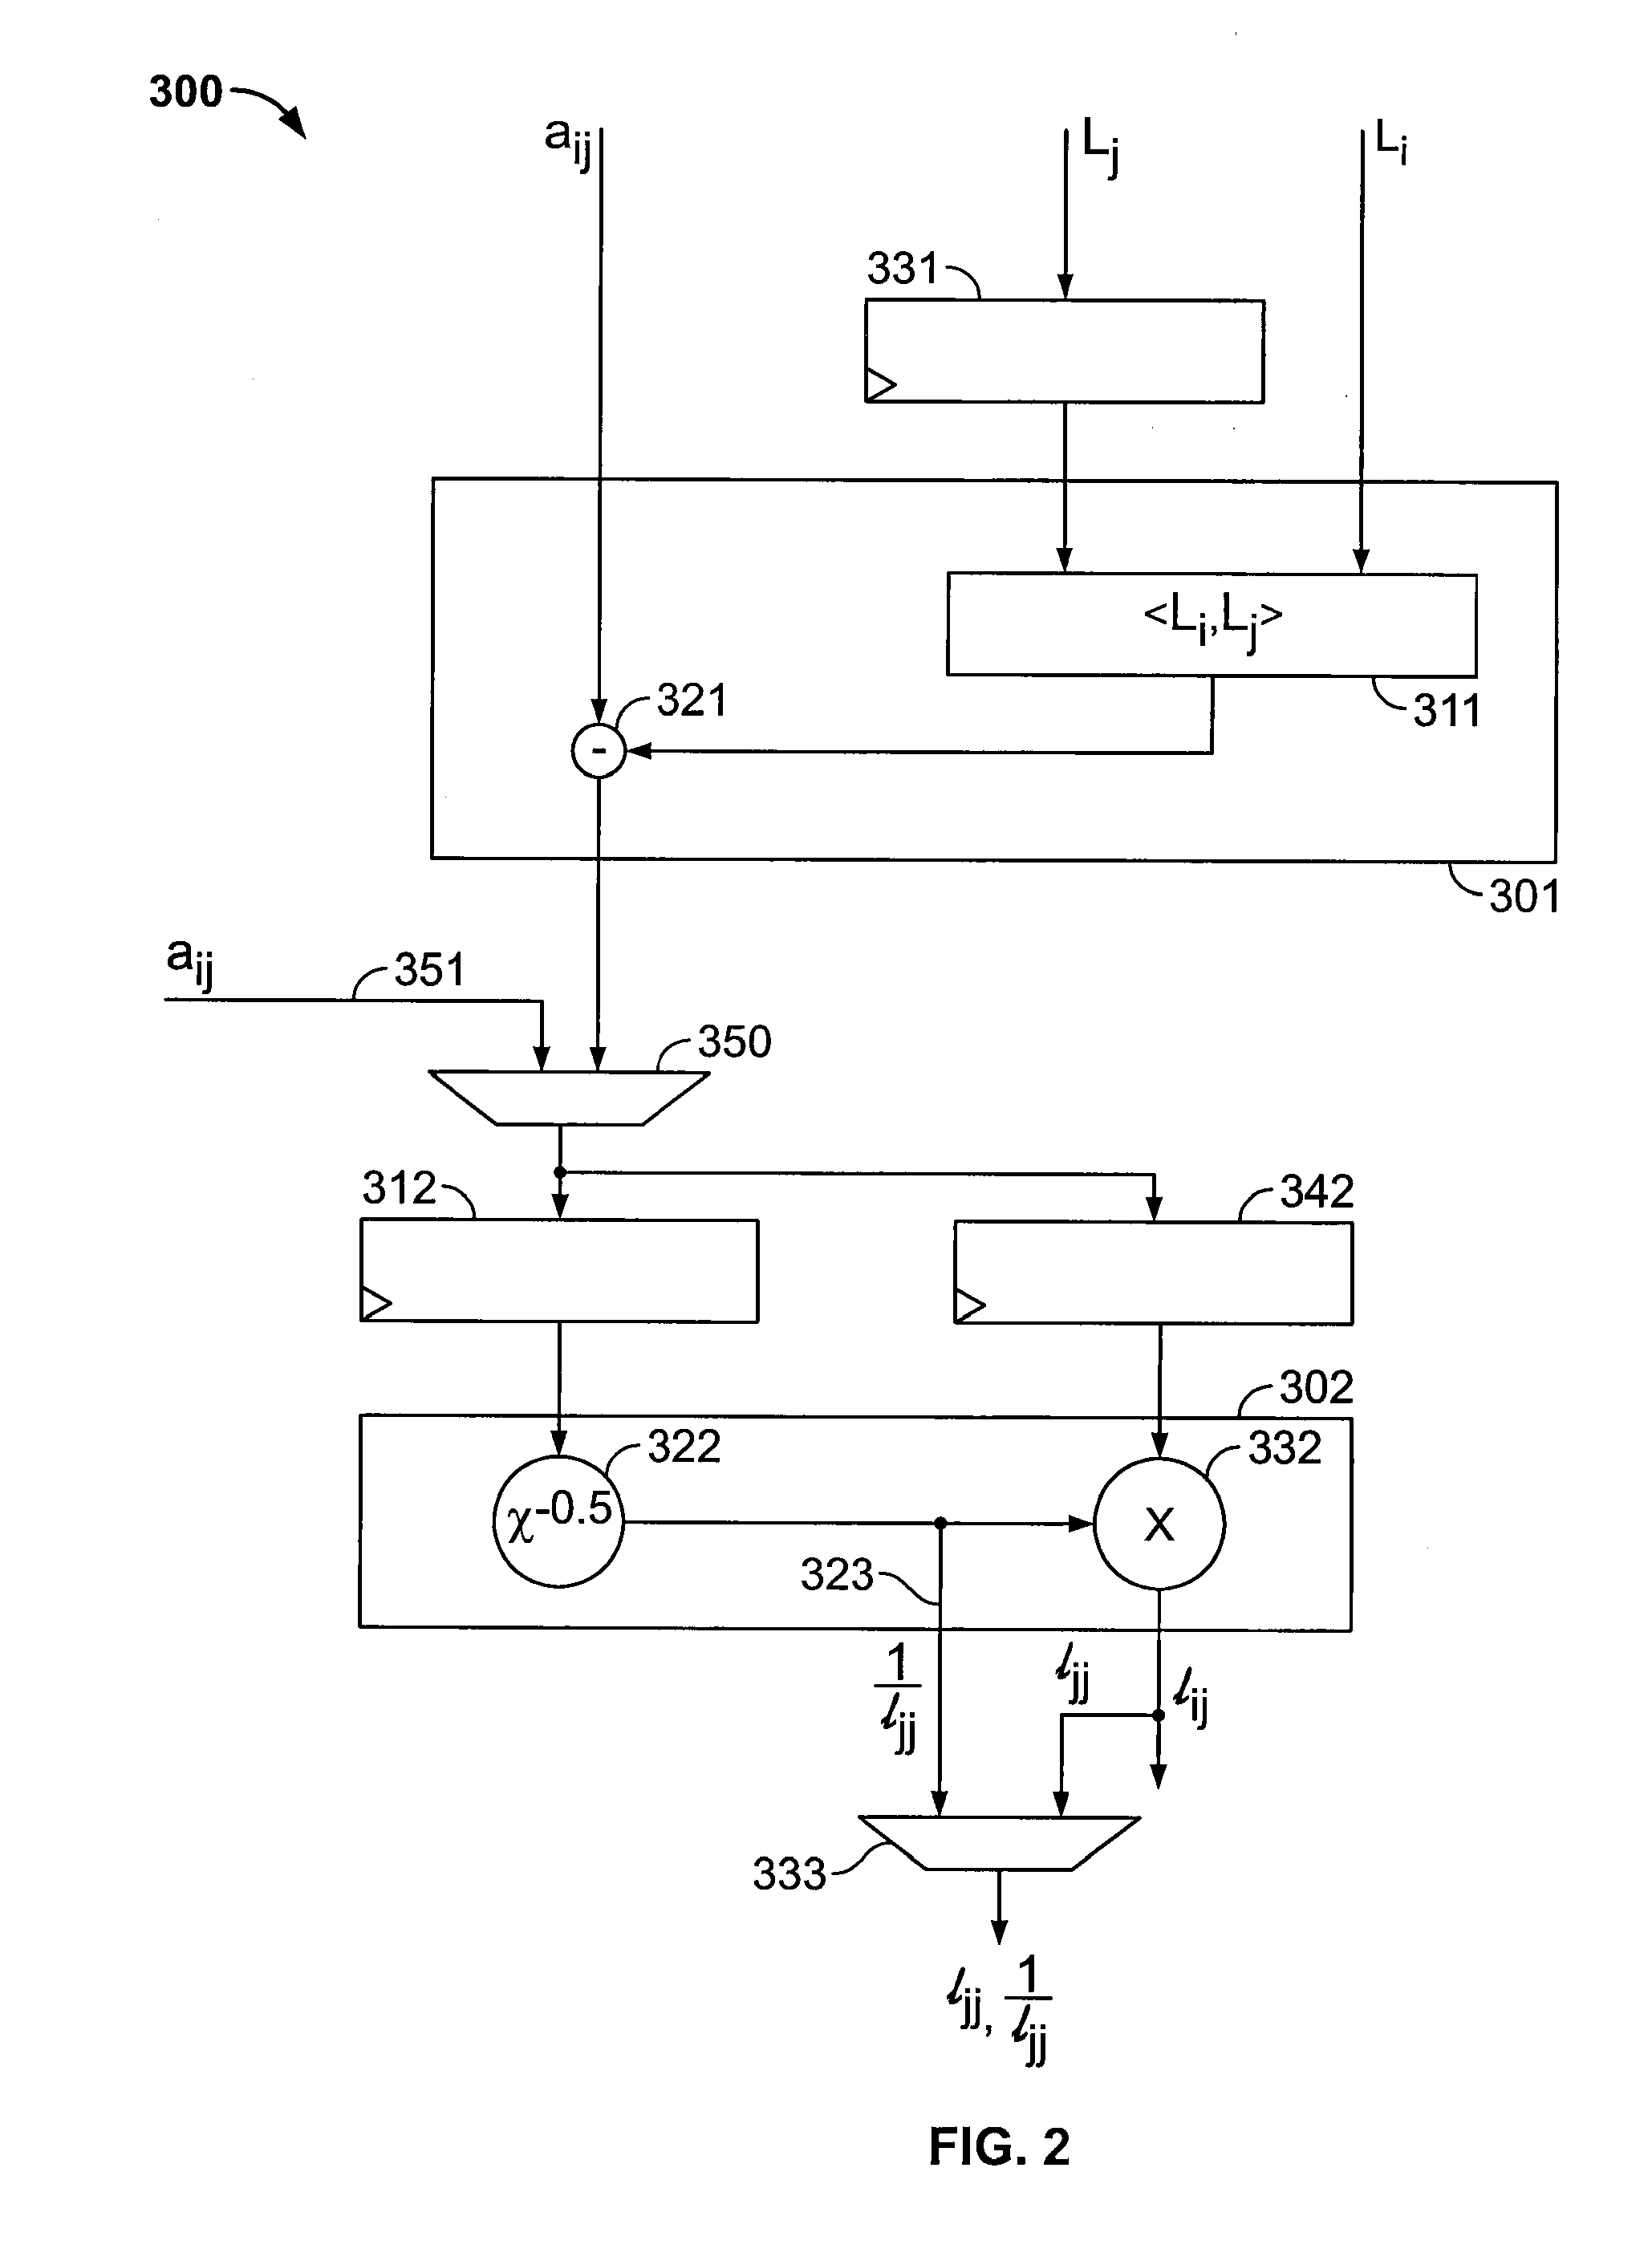 Solving linear matrices in an integrated circuit device